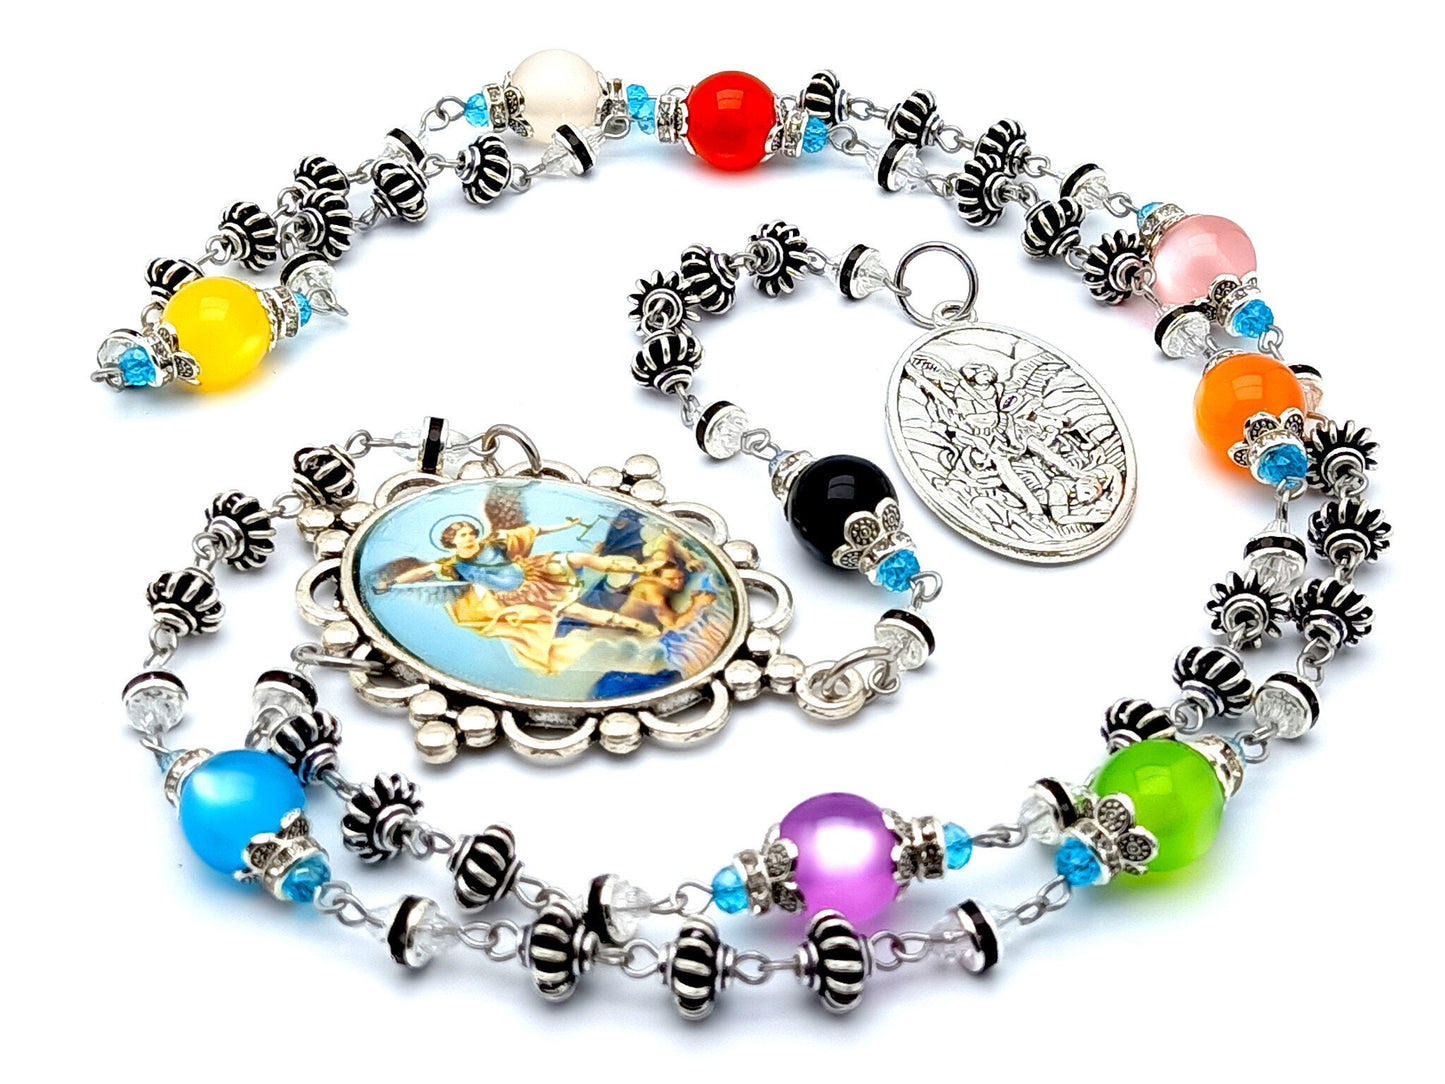 Saint Michael unique rosary beads prayer chaplet with Tibetan silver and coloured glass beads and Guardian Angel and Saint Michael medal.